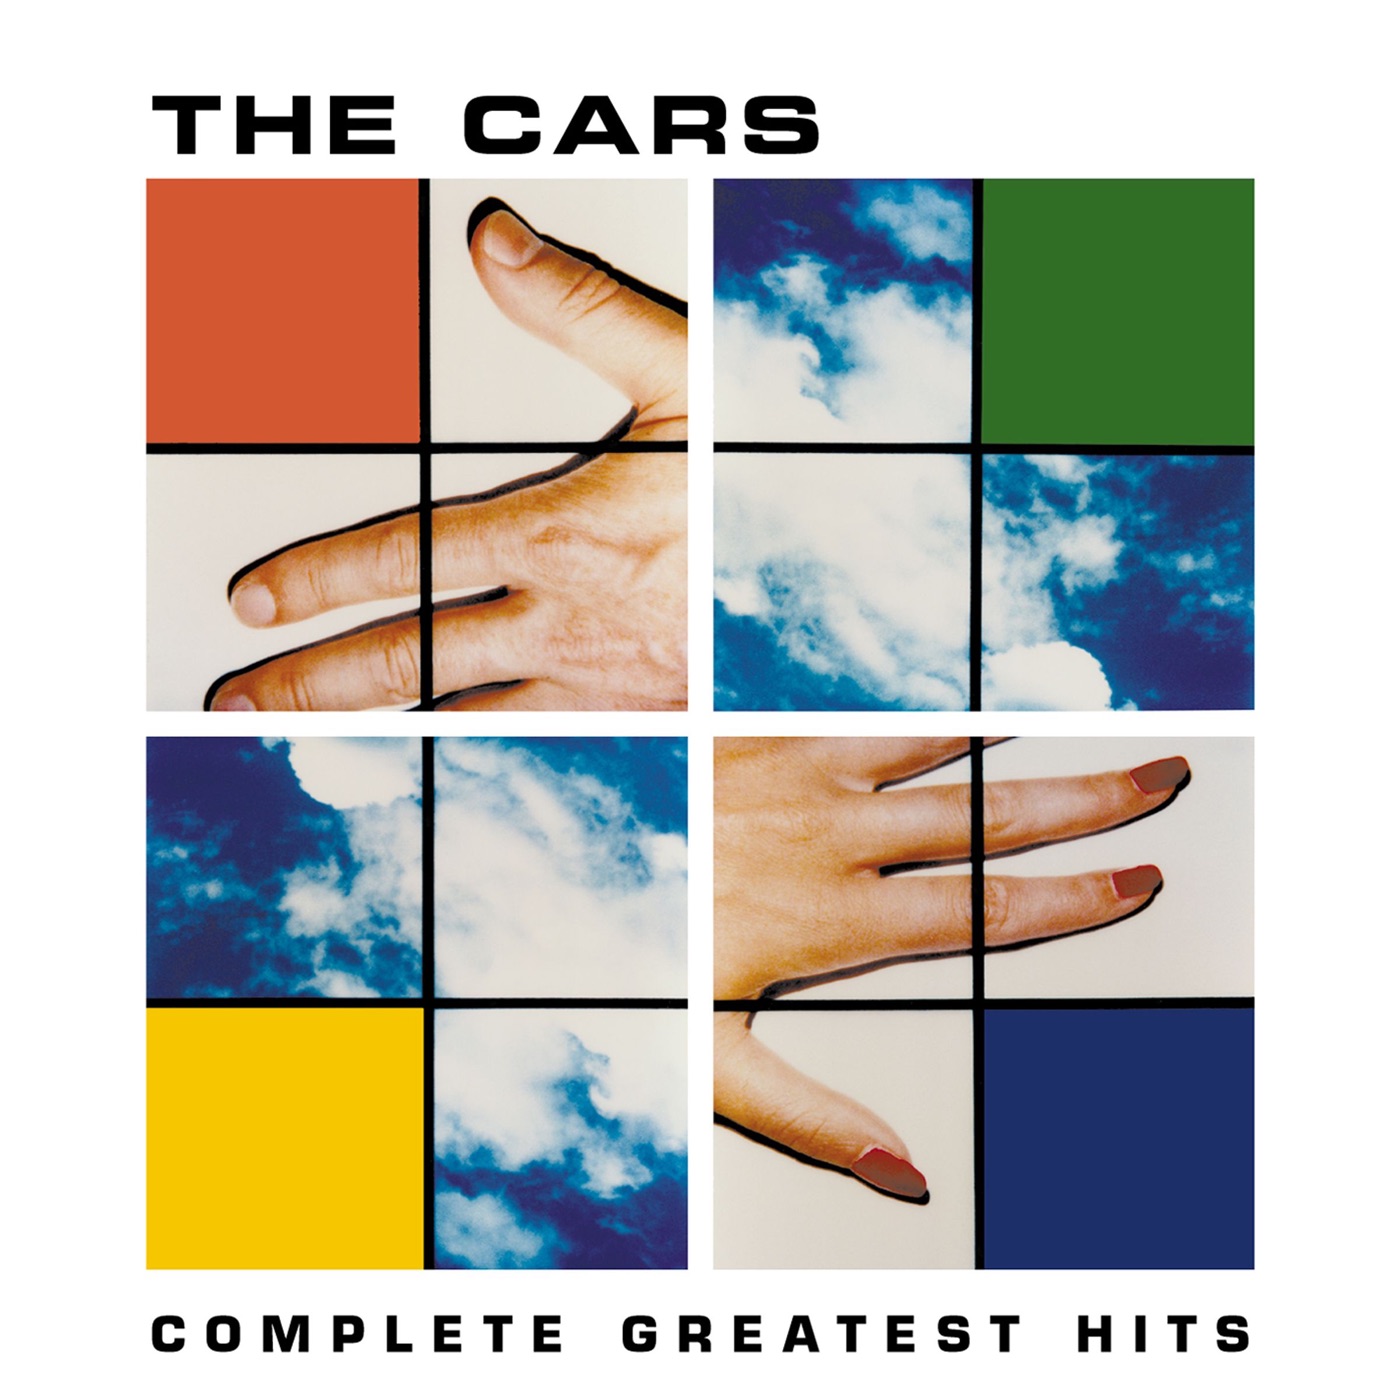 Complete Greatest Hits by The Cars